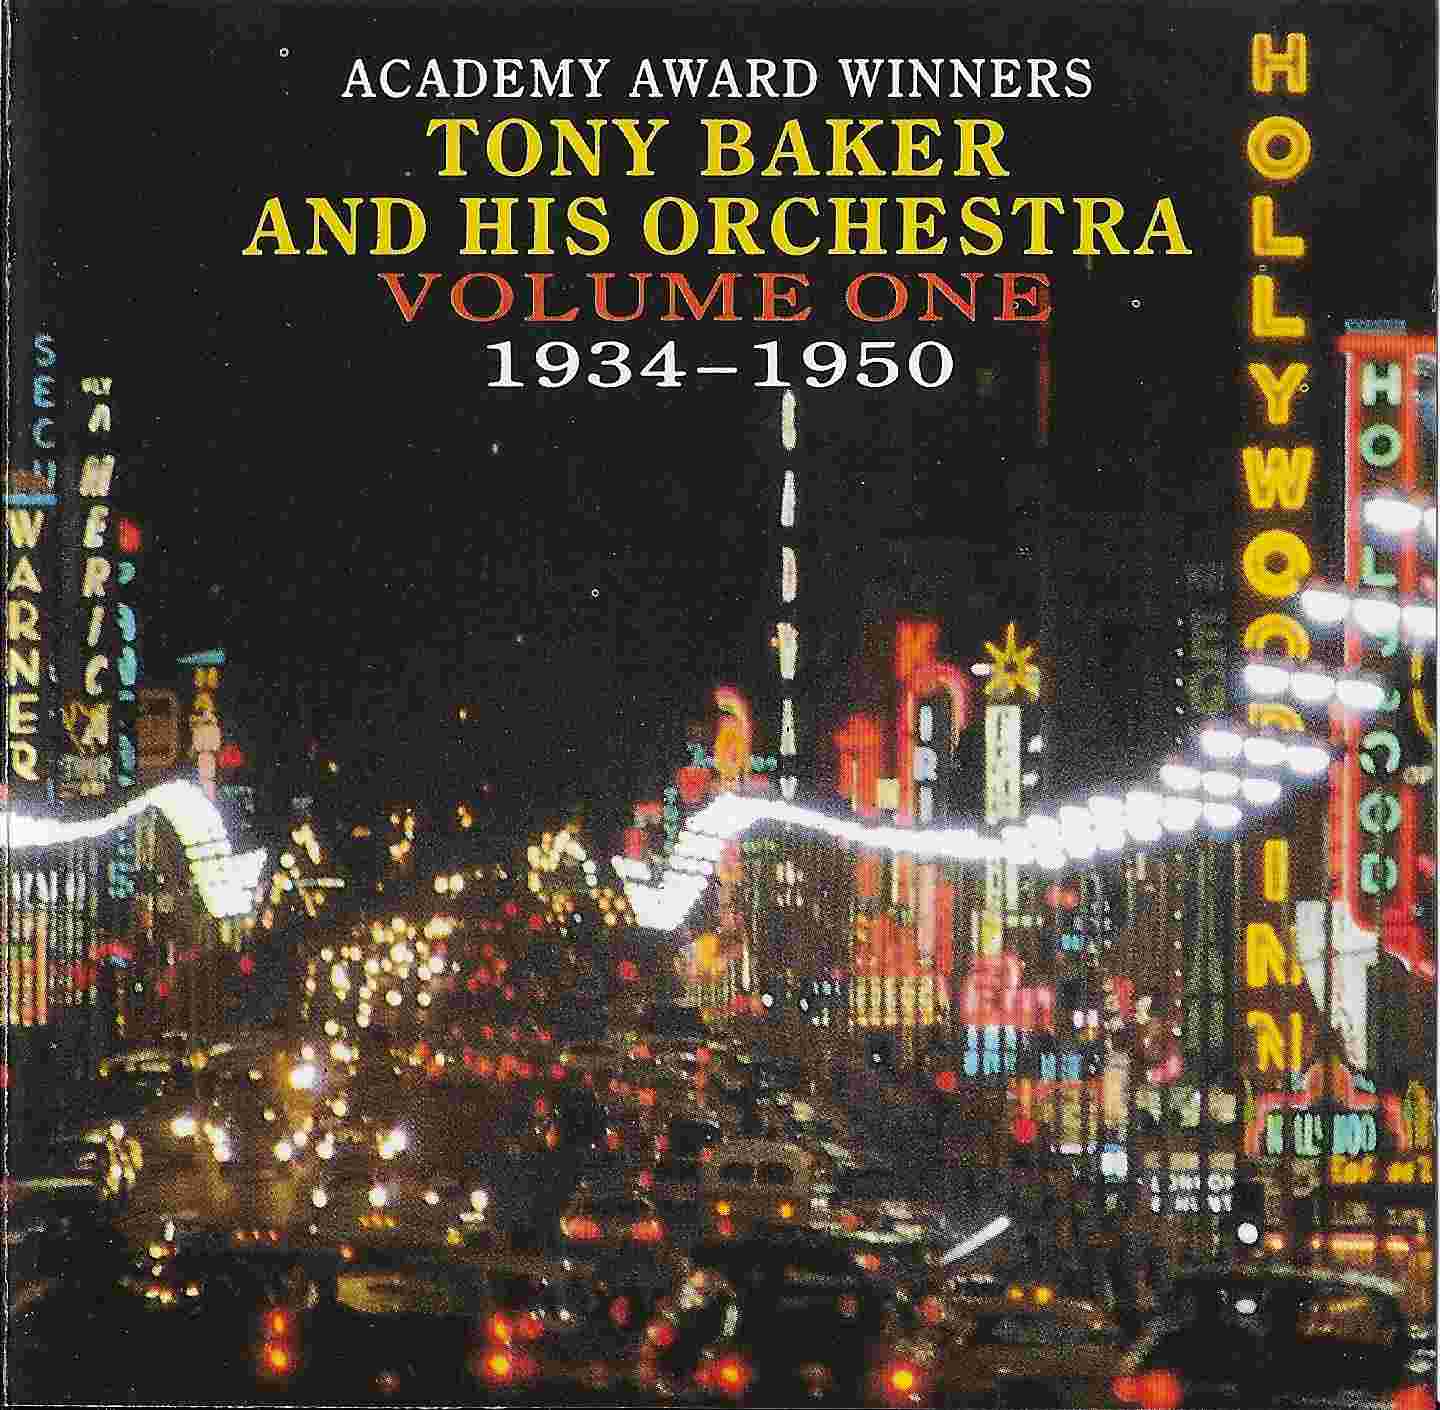 Picture of PWKS 655 Academy award winners, volume one 1934 - 1950 by artist Tony Baker and his orchestra from the BBC cds - Records and Tapes library